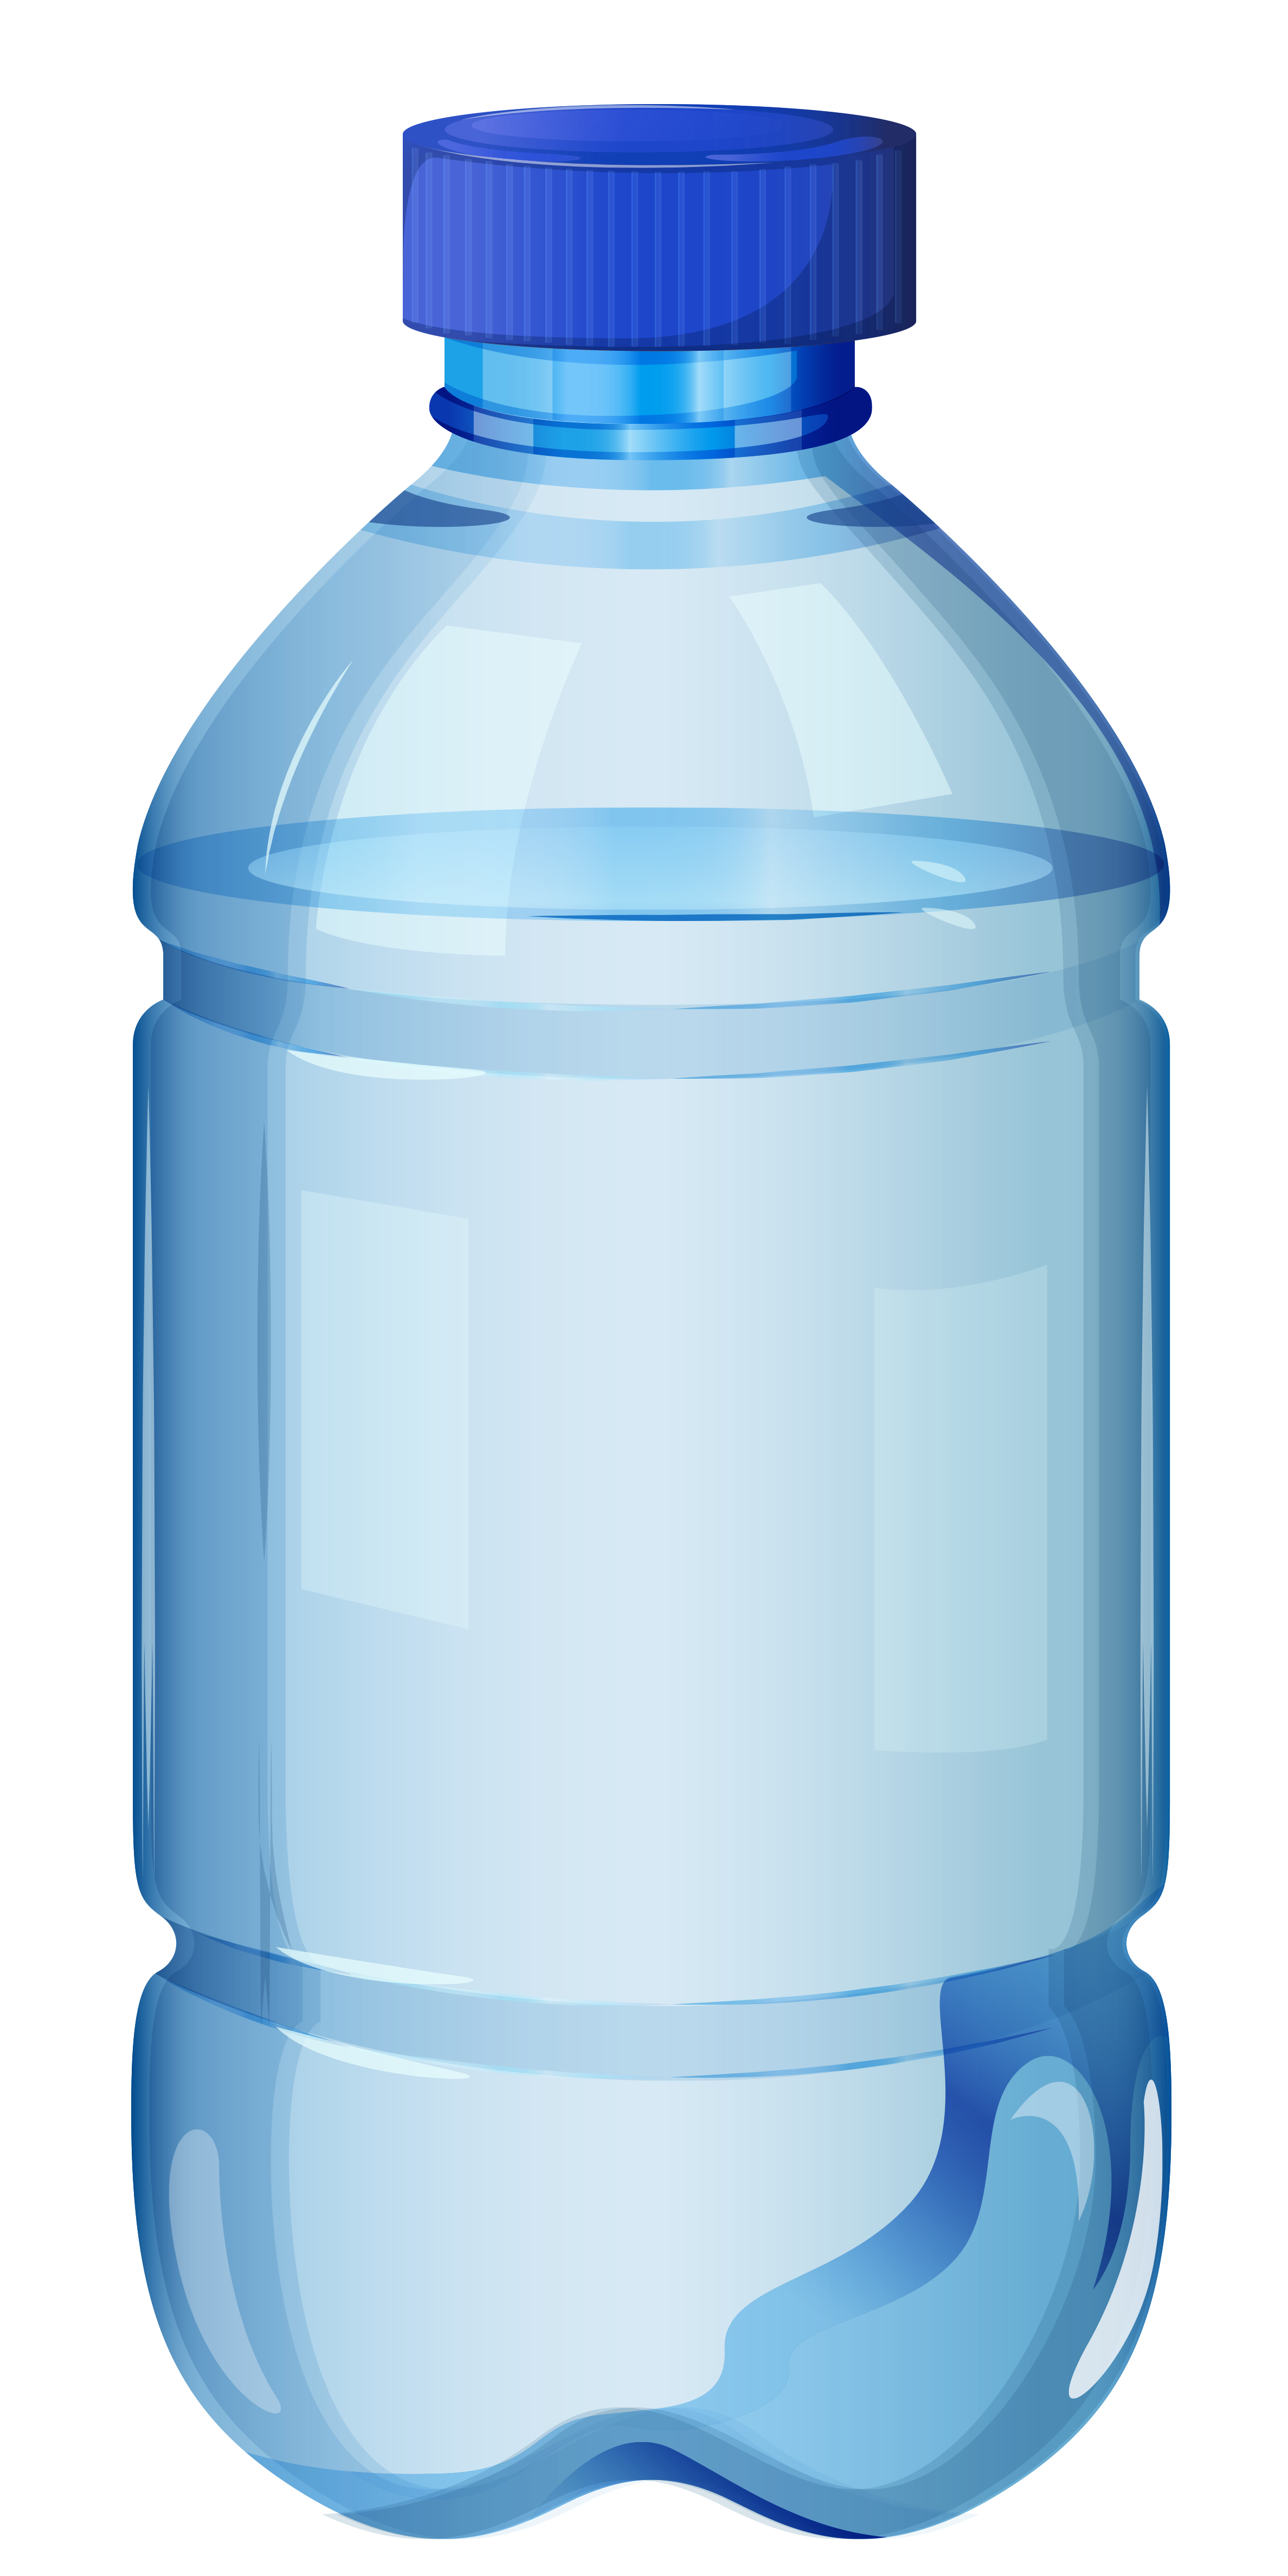 Small Bottle Of Mineral Water Png Clipart Image Gallery Yopriceville High Quality Images And Transparent Png Free Clipart